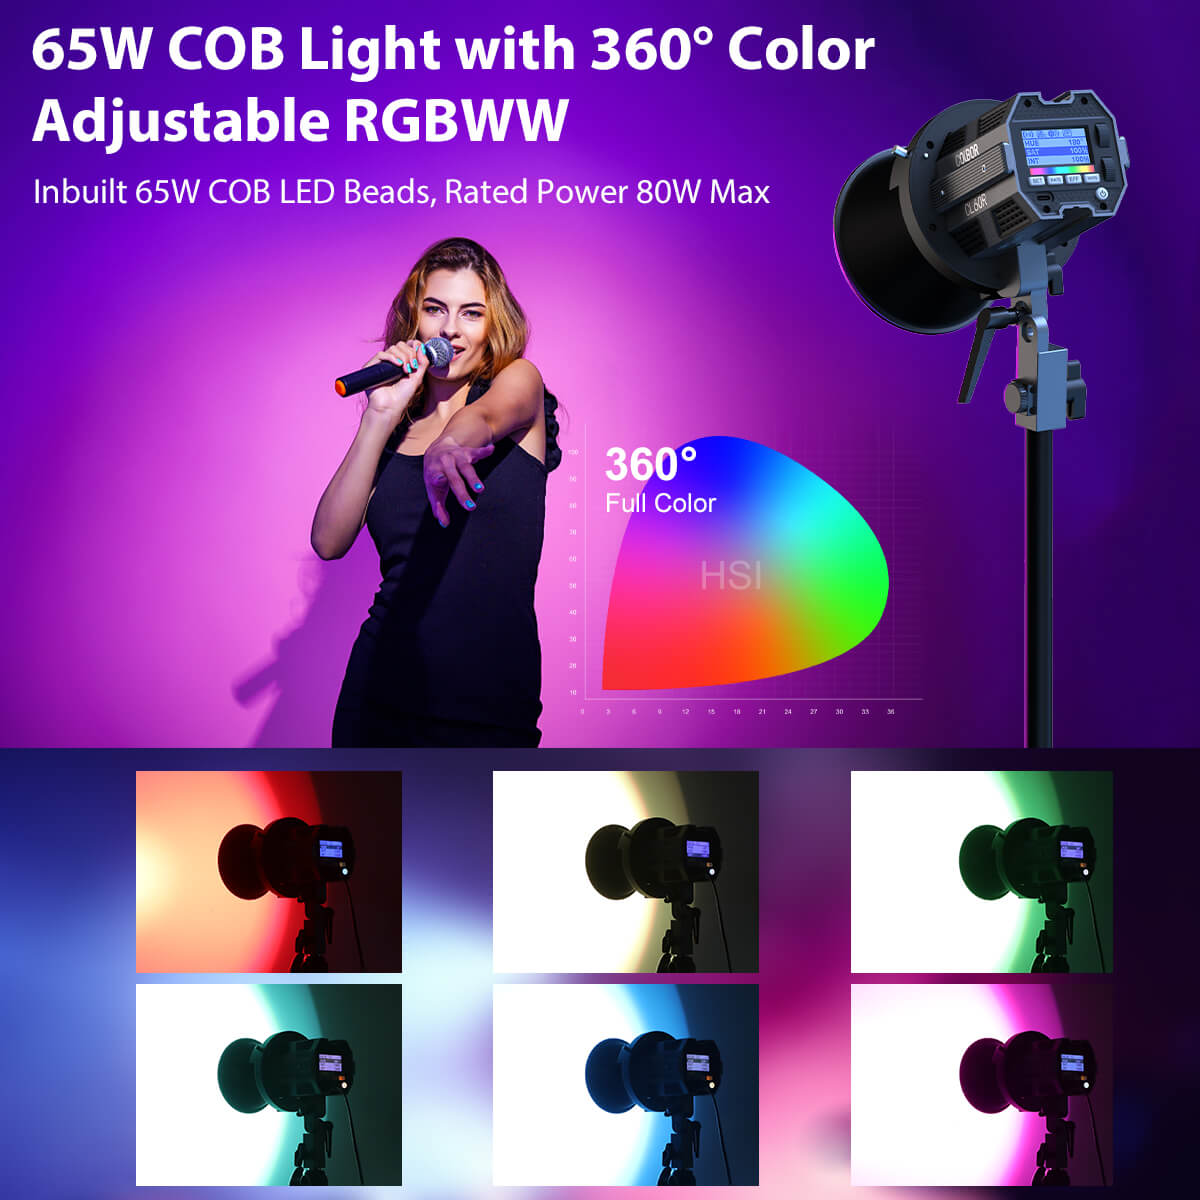 The 65W RGB LED video light outputs power max at 80W and has 360 adjustable full colors. 